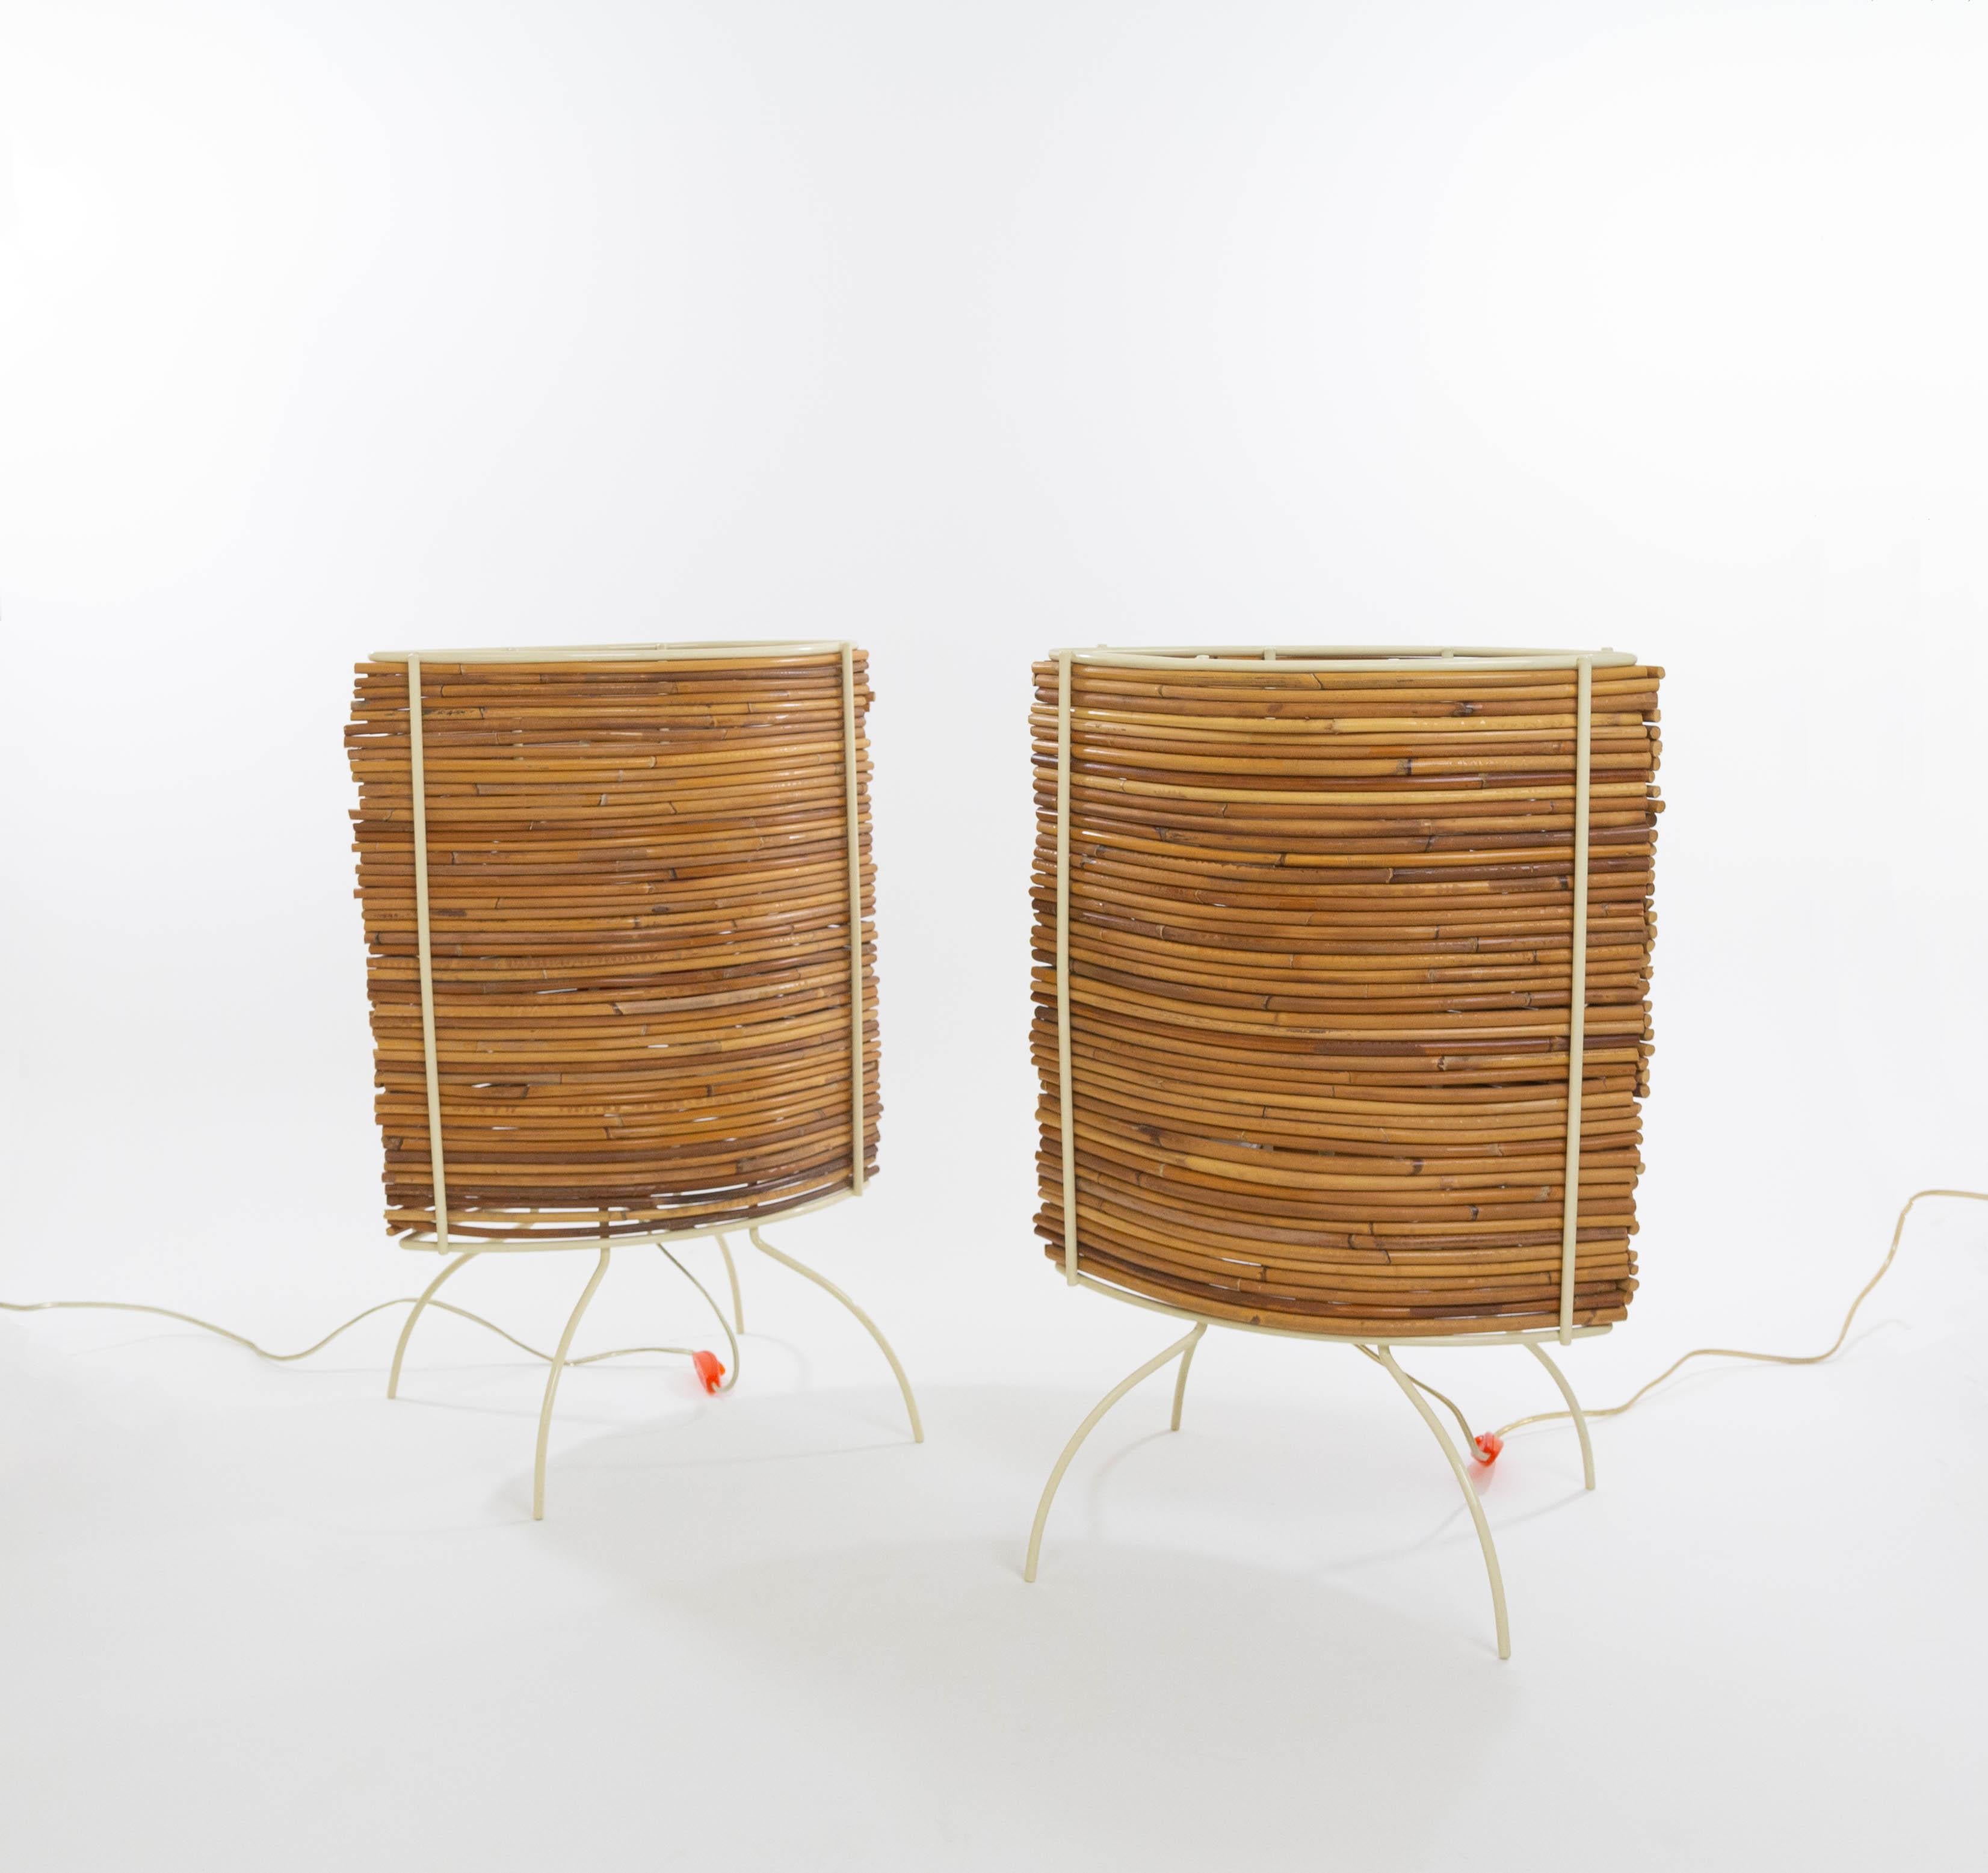 Pair of large Bambù table lamps by Humberto & Fernando Campana for Candle (Fontana Arte).

The model consists of a, seen from above, eye-shaped cream coloured metal frame in which curved pieces of bamboo form beautiful screens. The model was